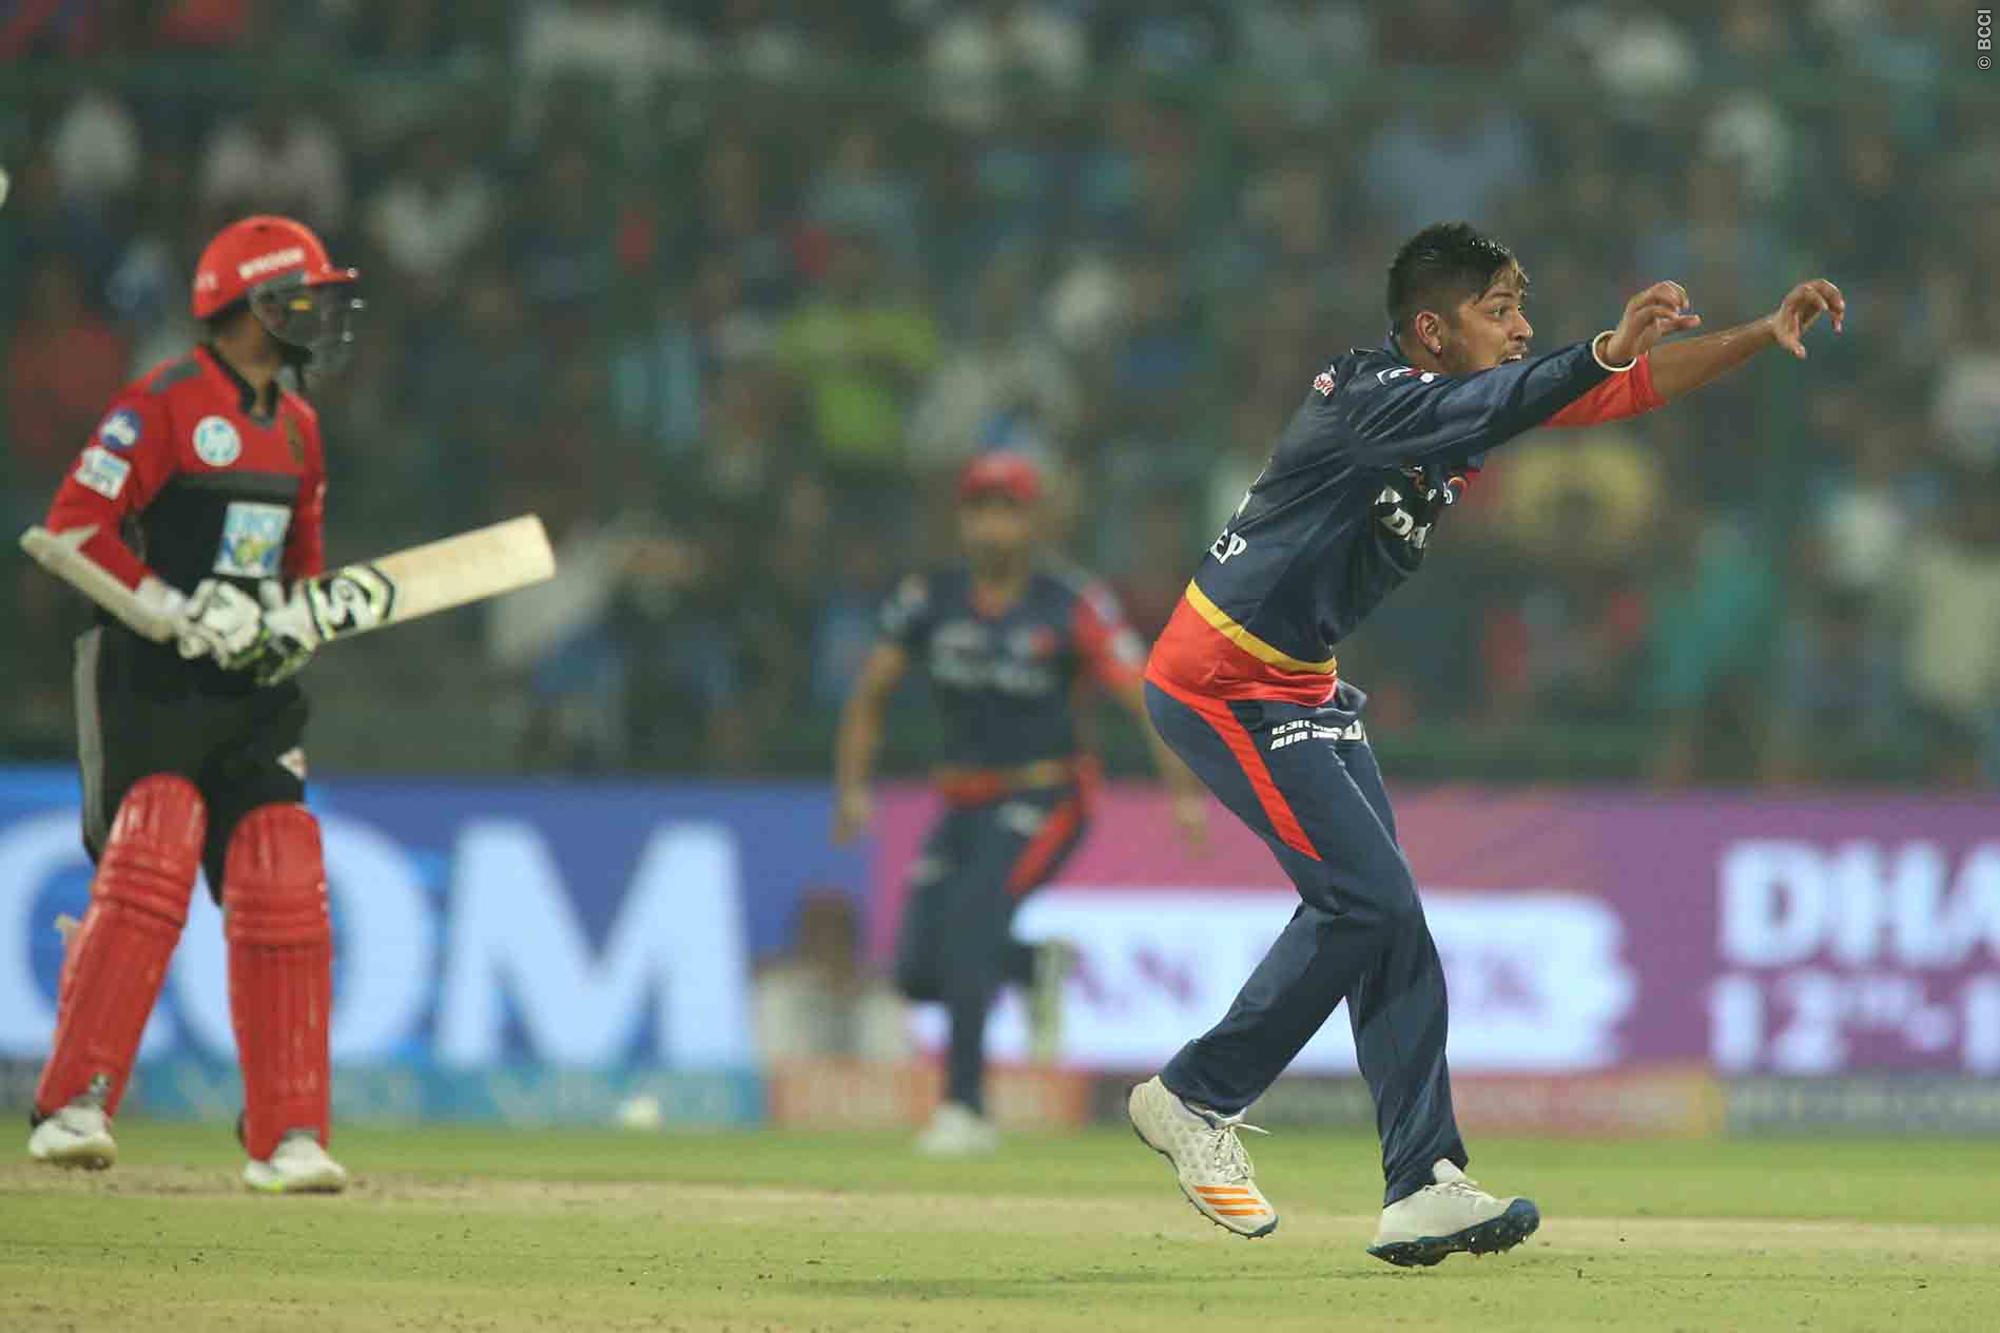 IPL 2020 | Delhi promised me during trials that they’ll pick me in auction, reveals Sandeep Lamichhane